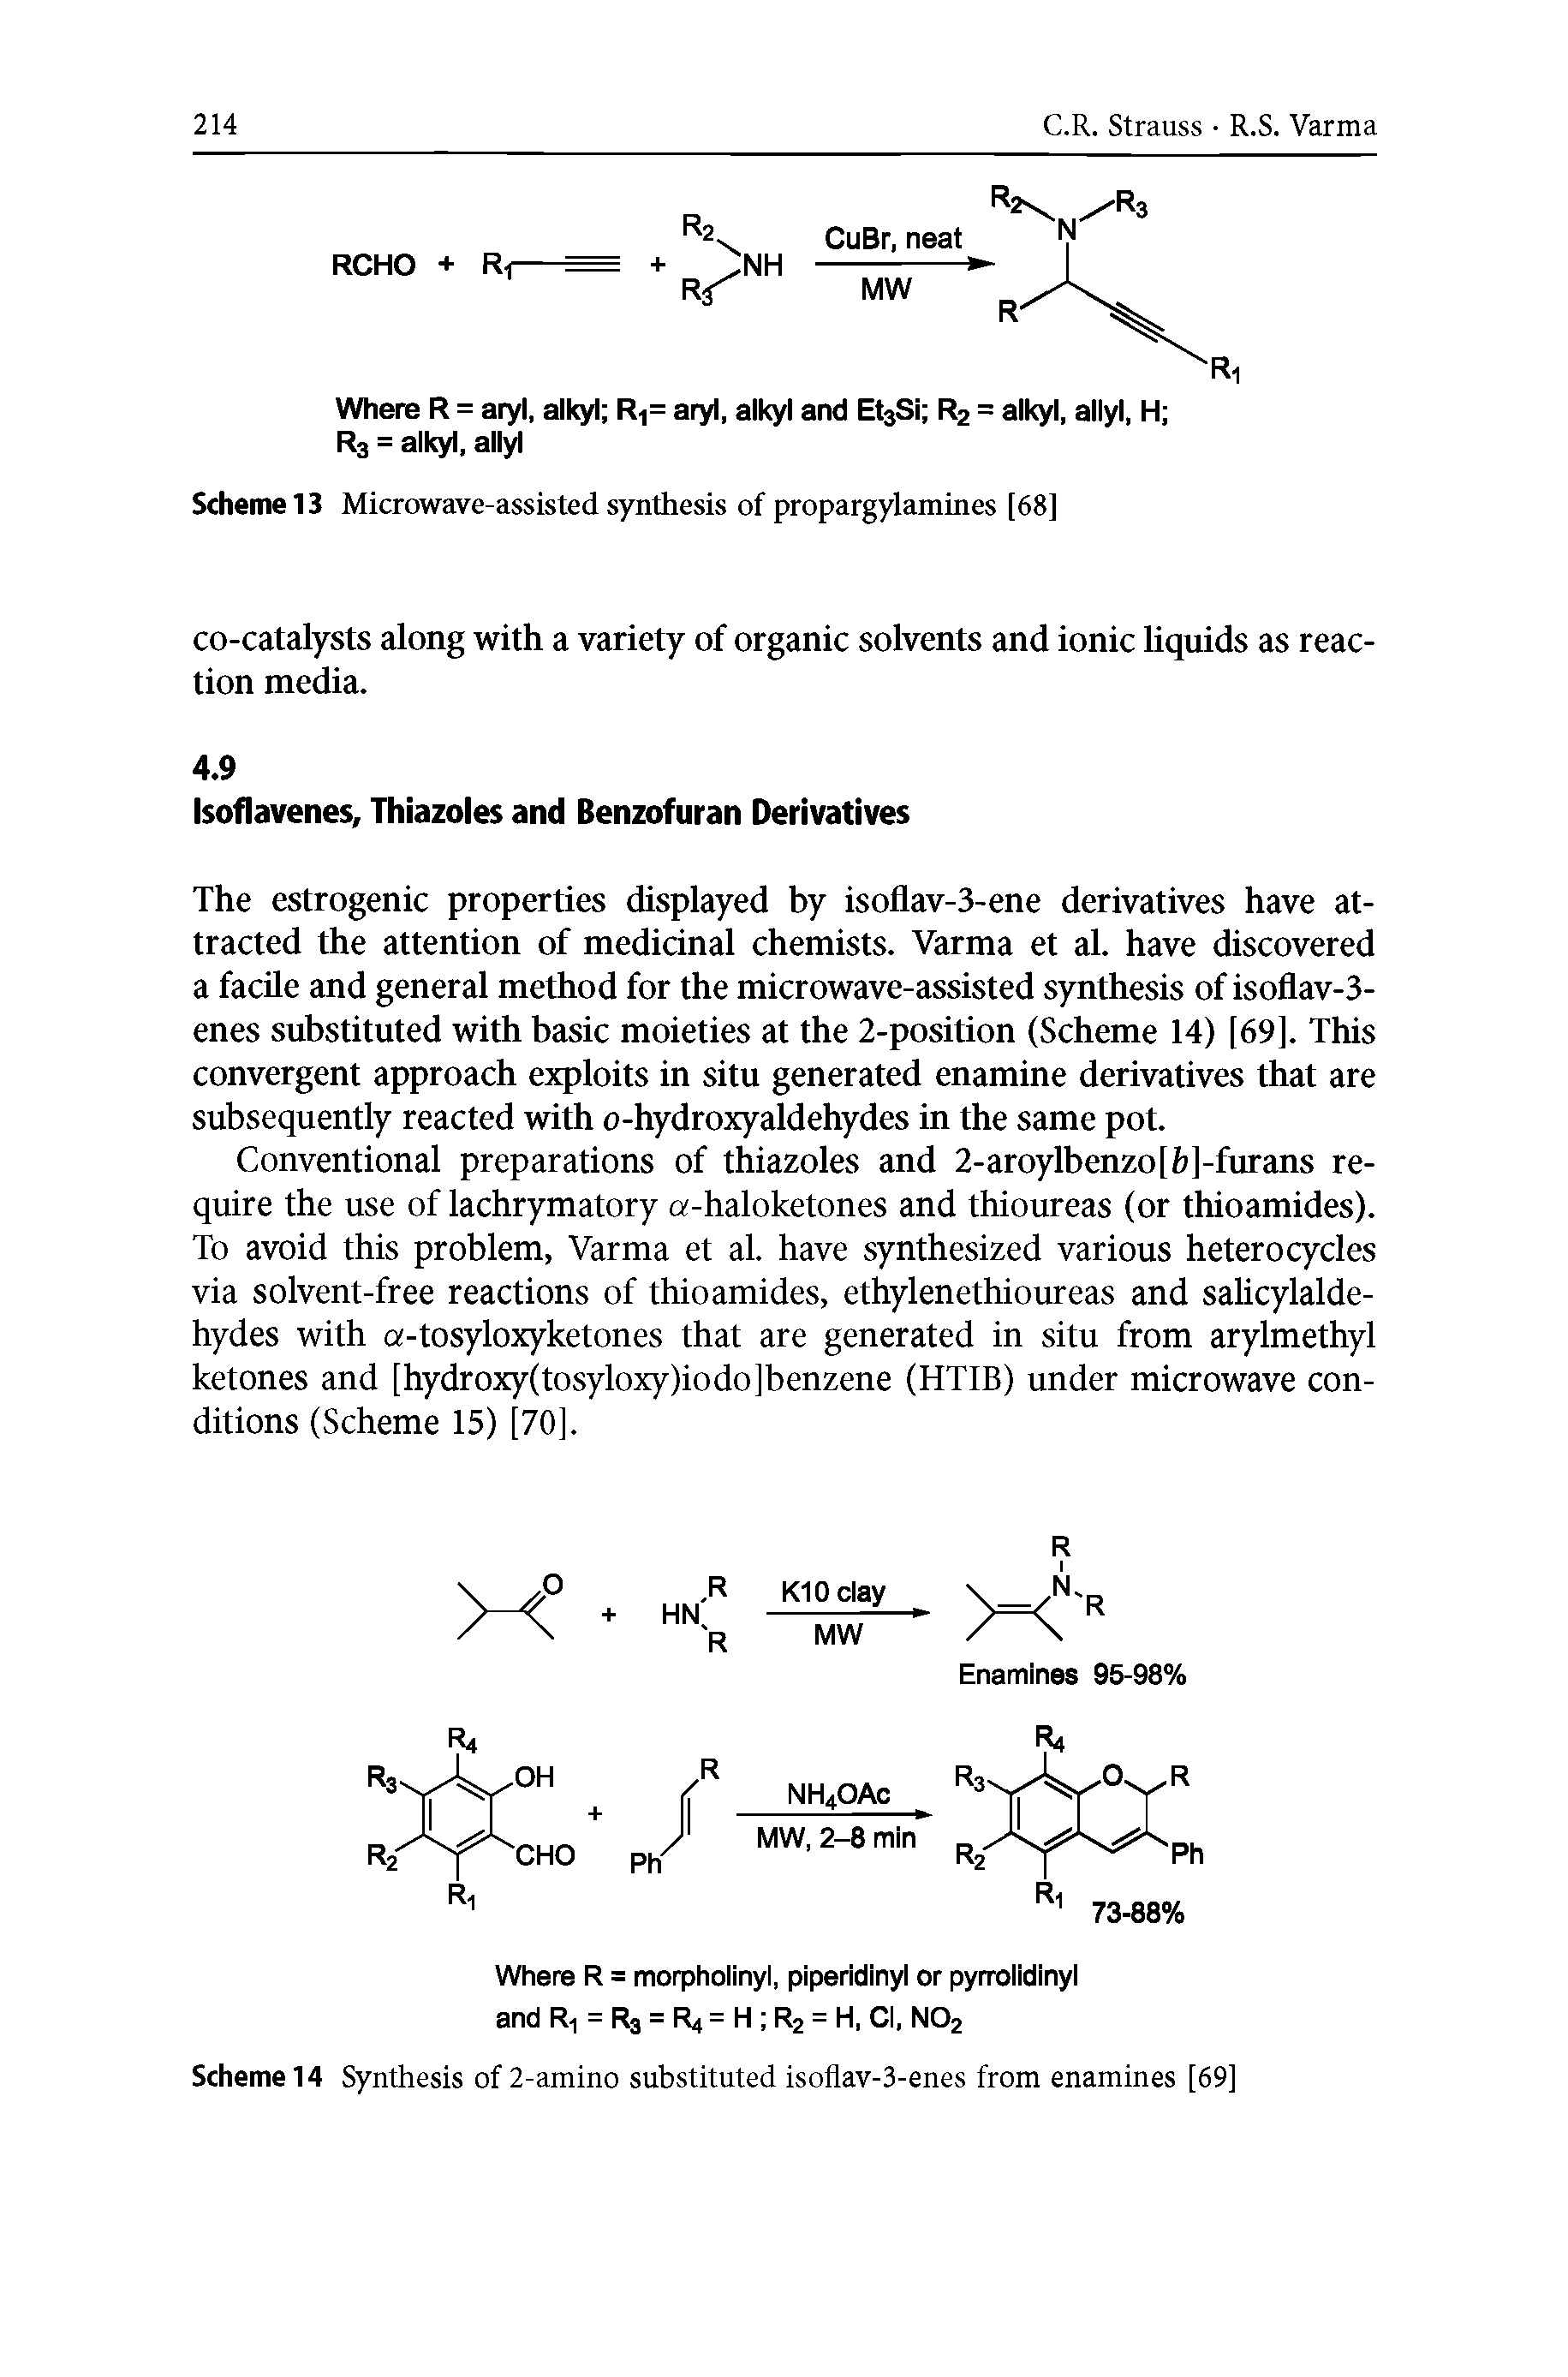 Scheme 14 Synthesis of 2-amino substituted isoflav-3-enes from enamines [69]...